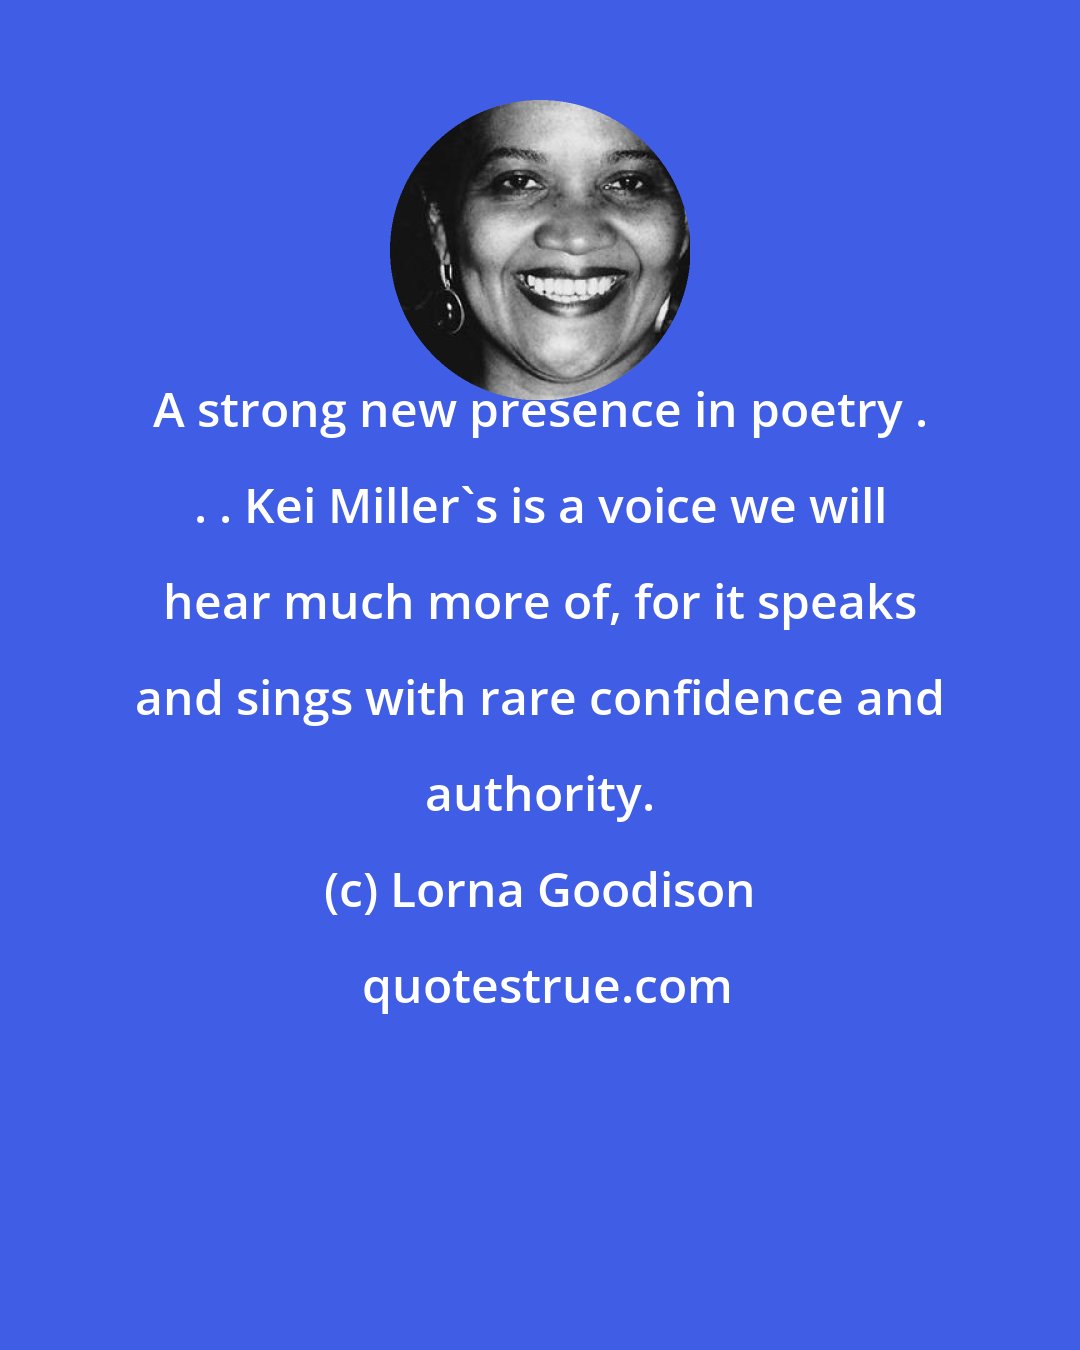 Lorna Goodison: A strong new presence in poetry . . . Kei Miller's is a voice we will hear much more of, for it speaks and sings with rare confidence and authority.